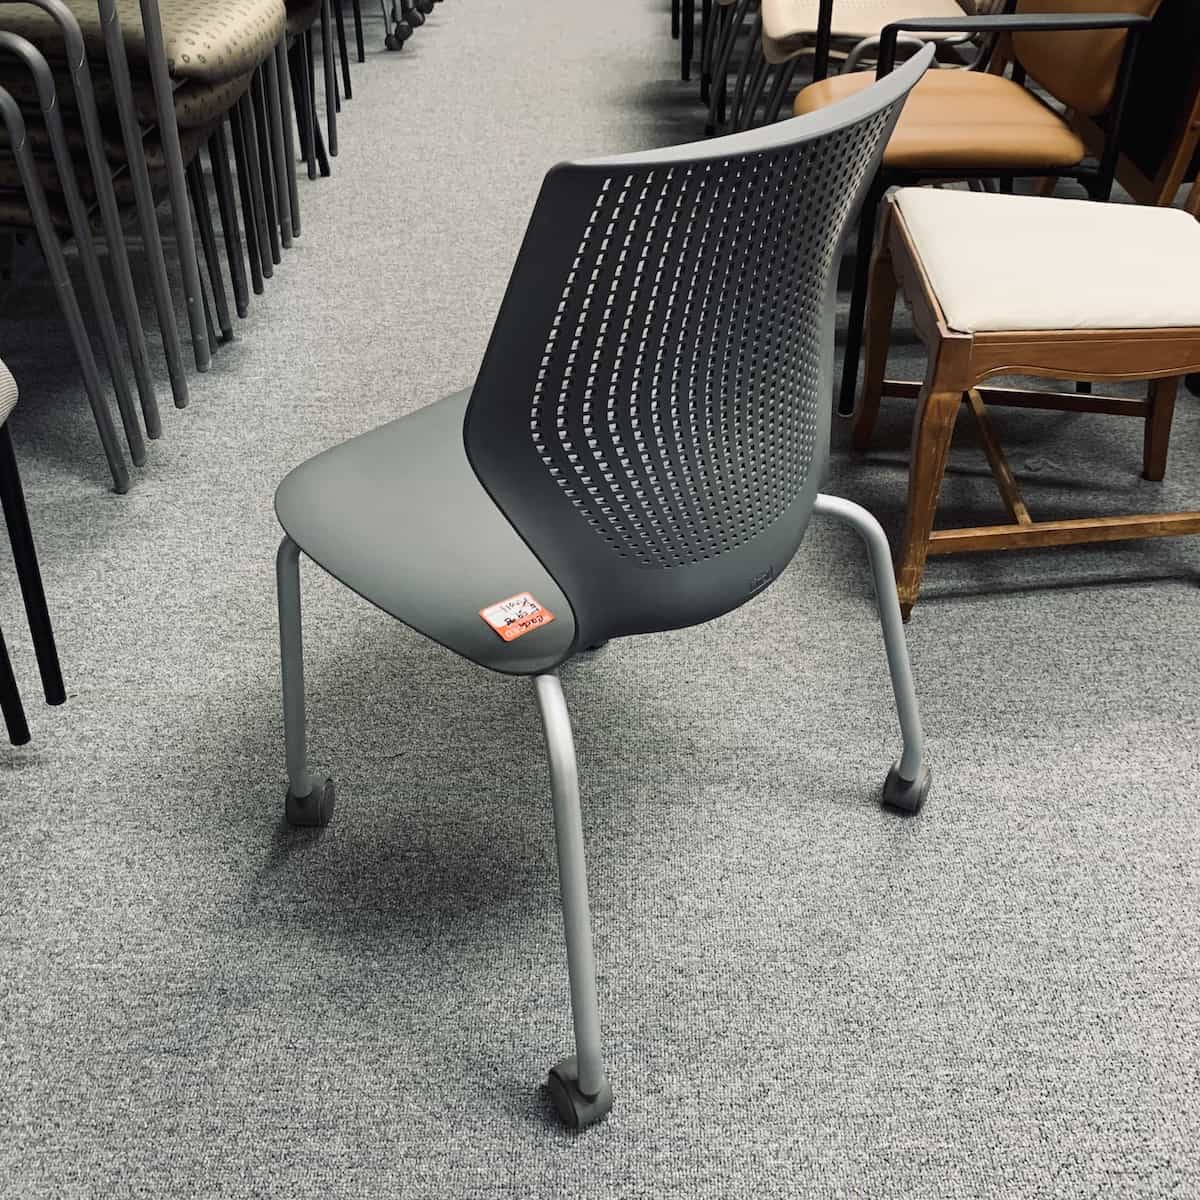 grey-plastic-stacking-chair-wheels-back